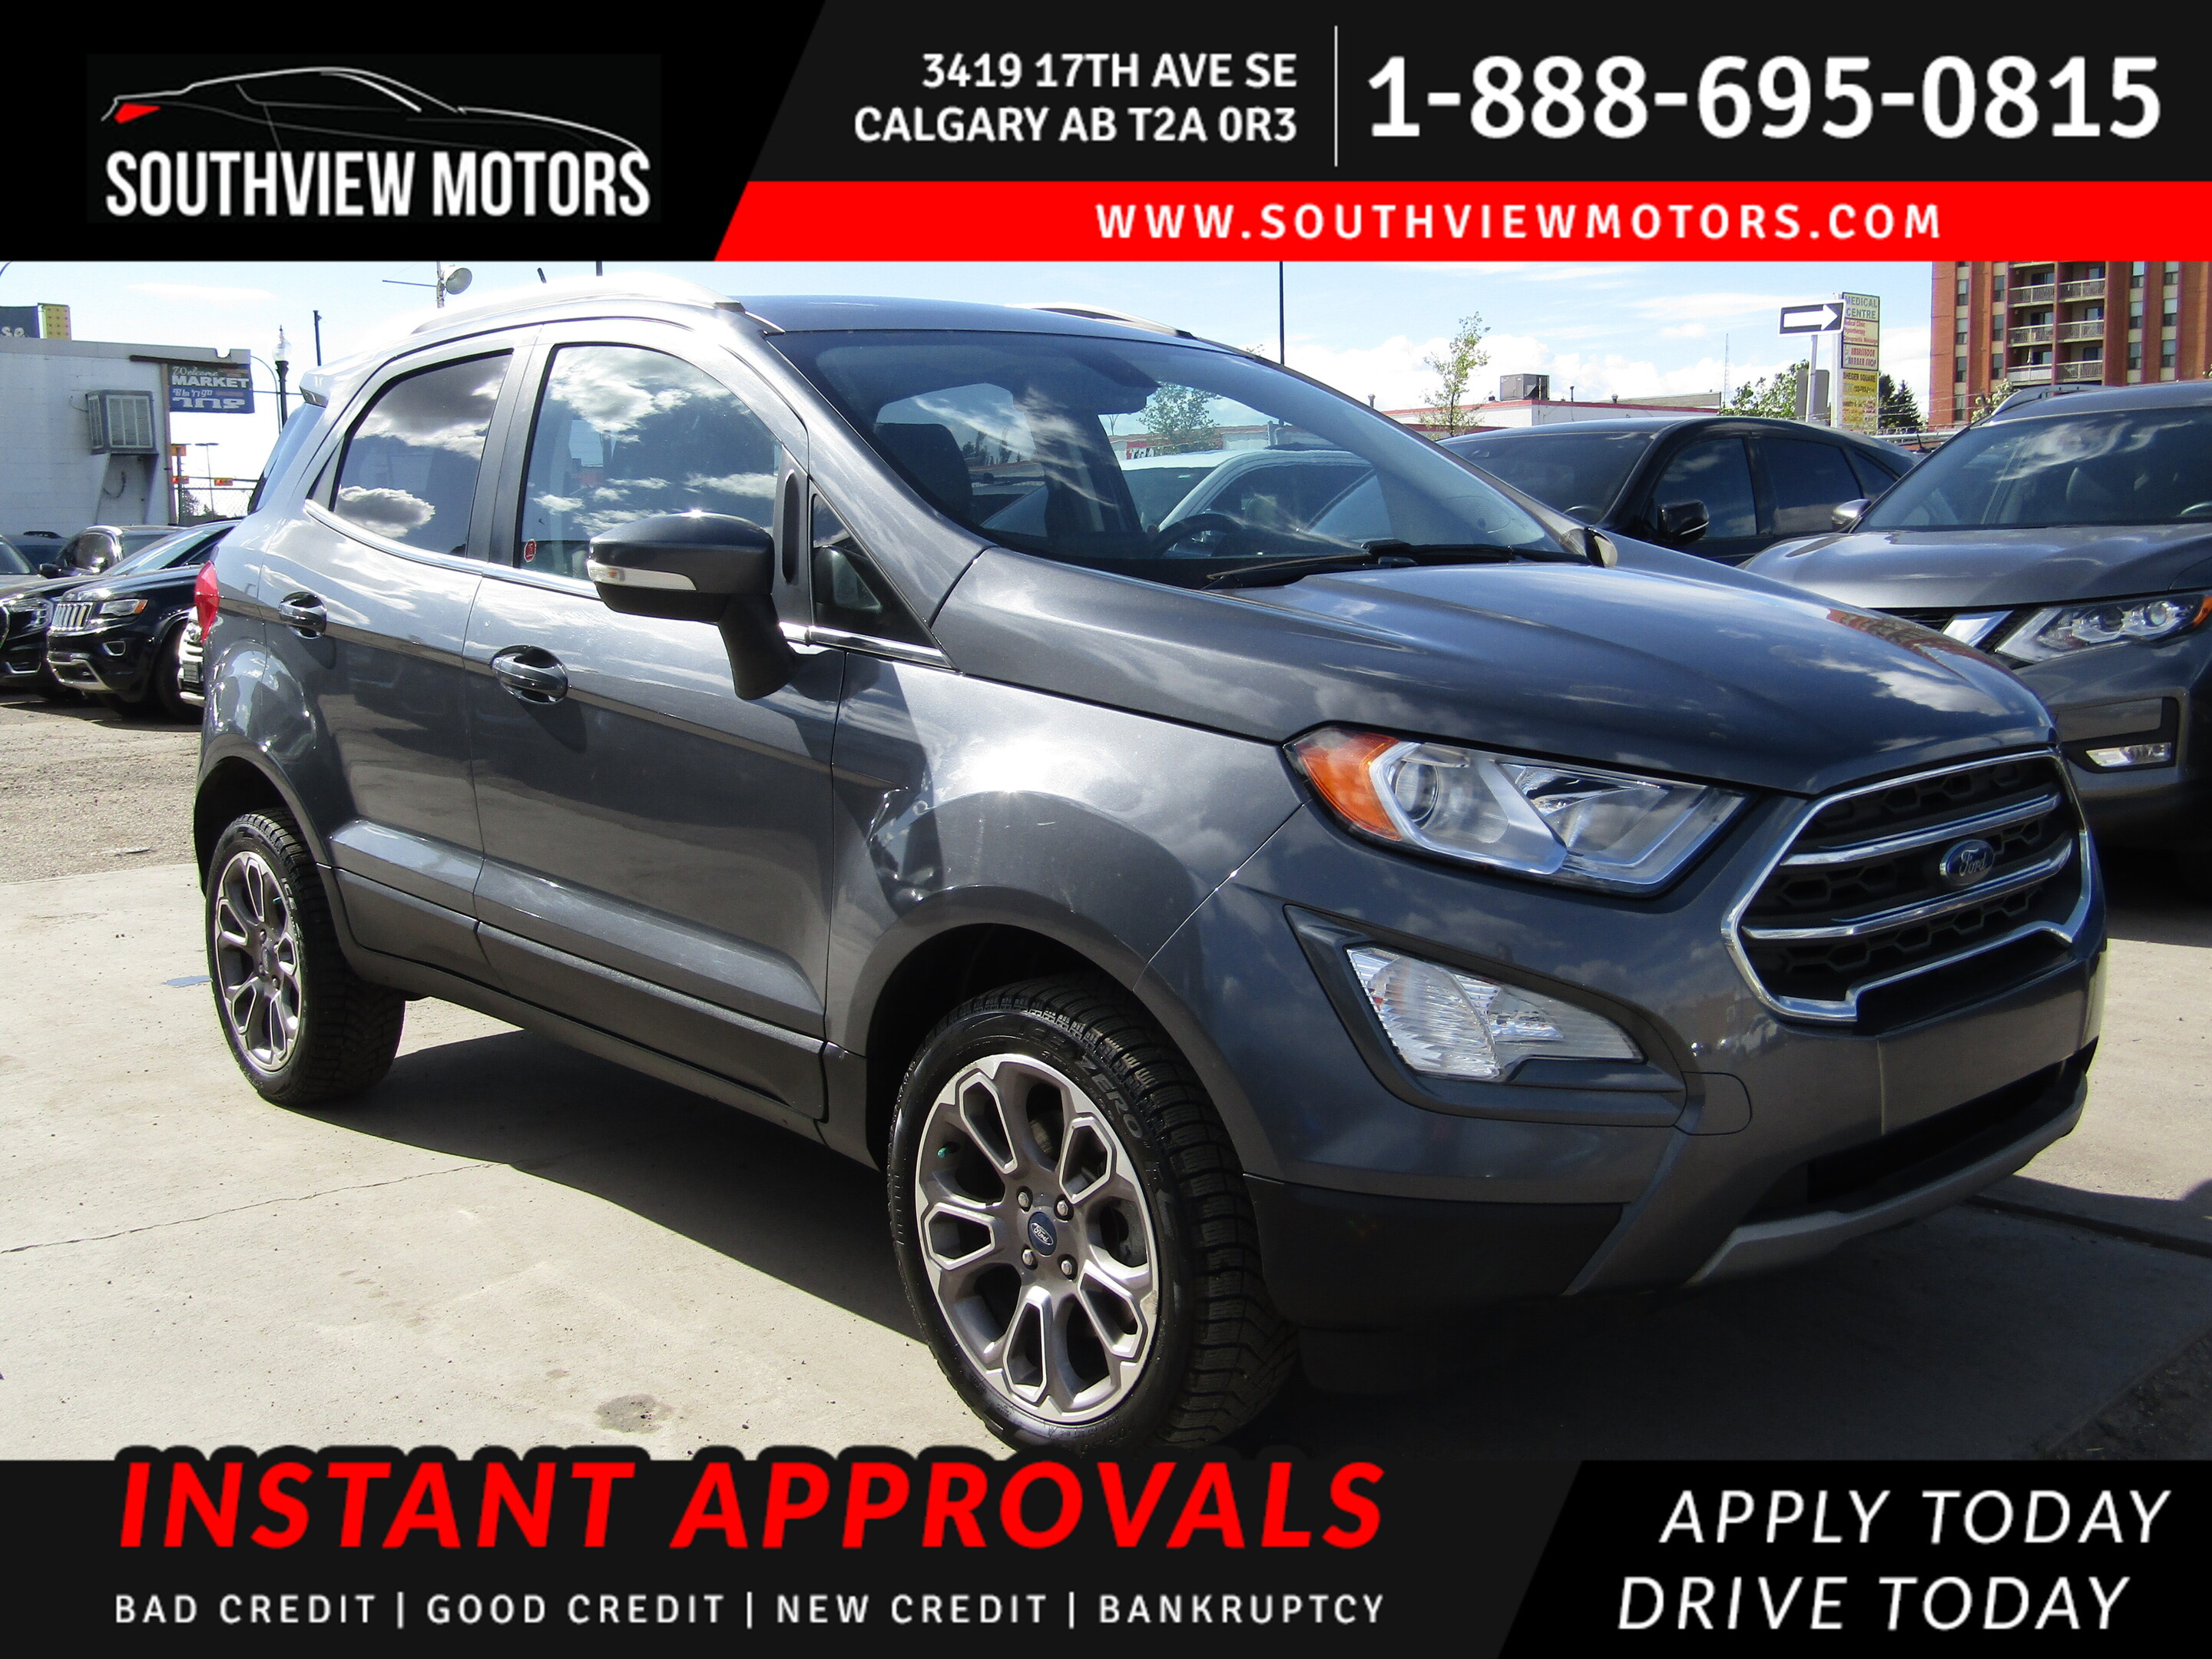 2019 Ford EcoSport TITANIUM 4WD 2.0L B.S.A/NAV/CAM/ROOF/LEATHER